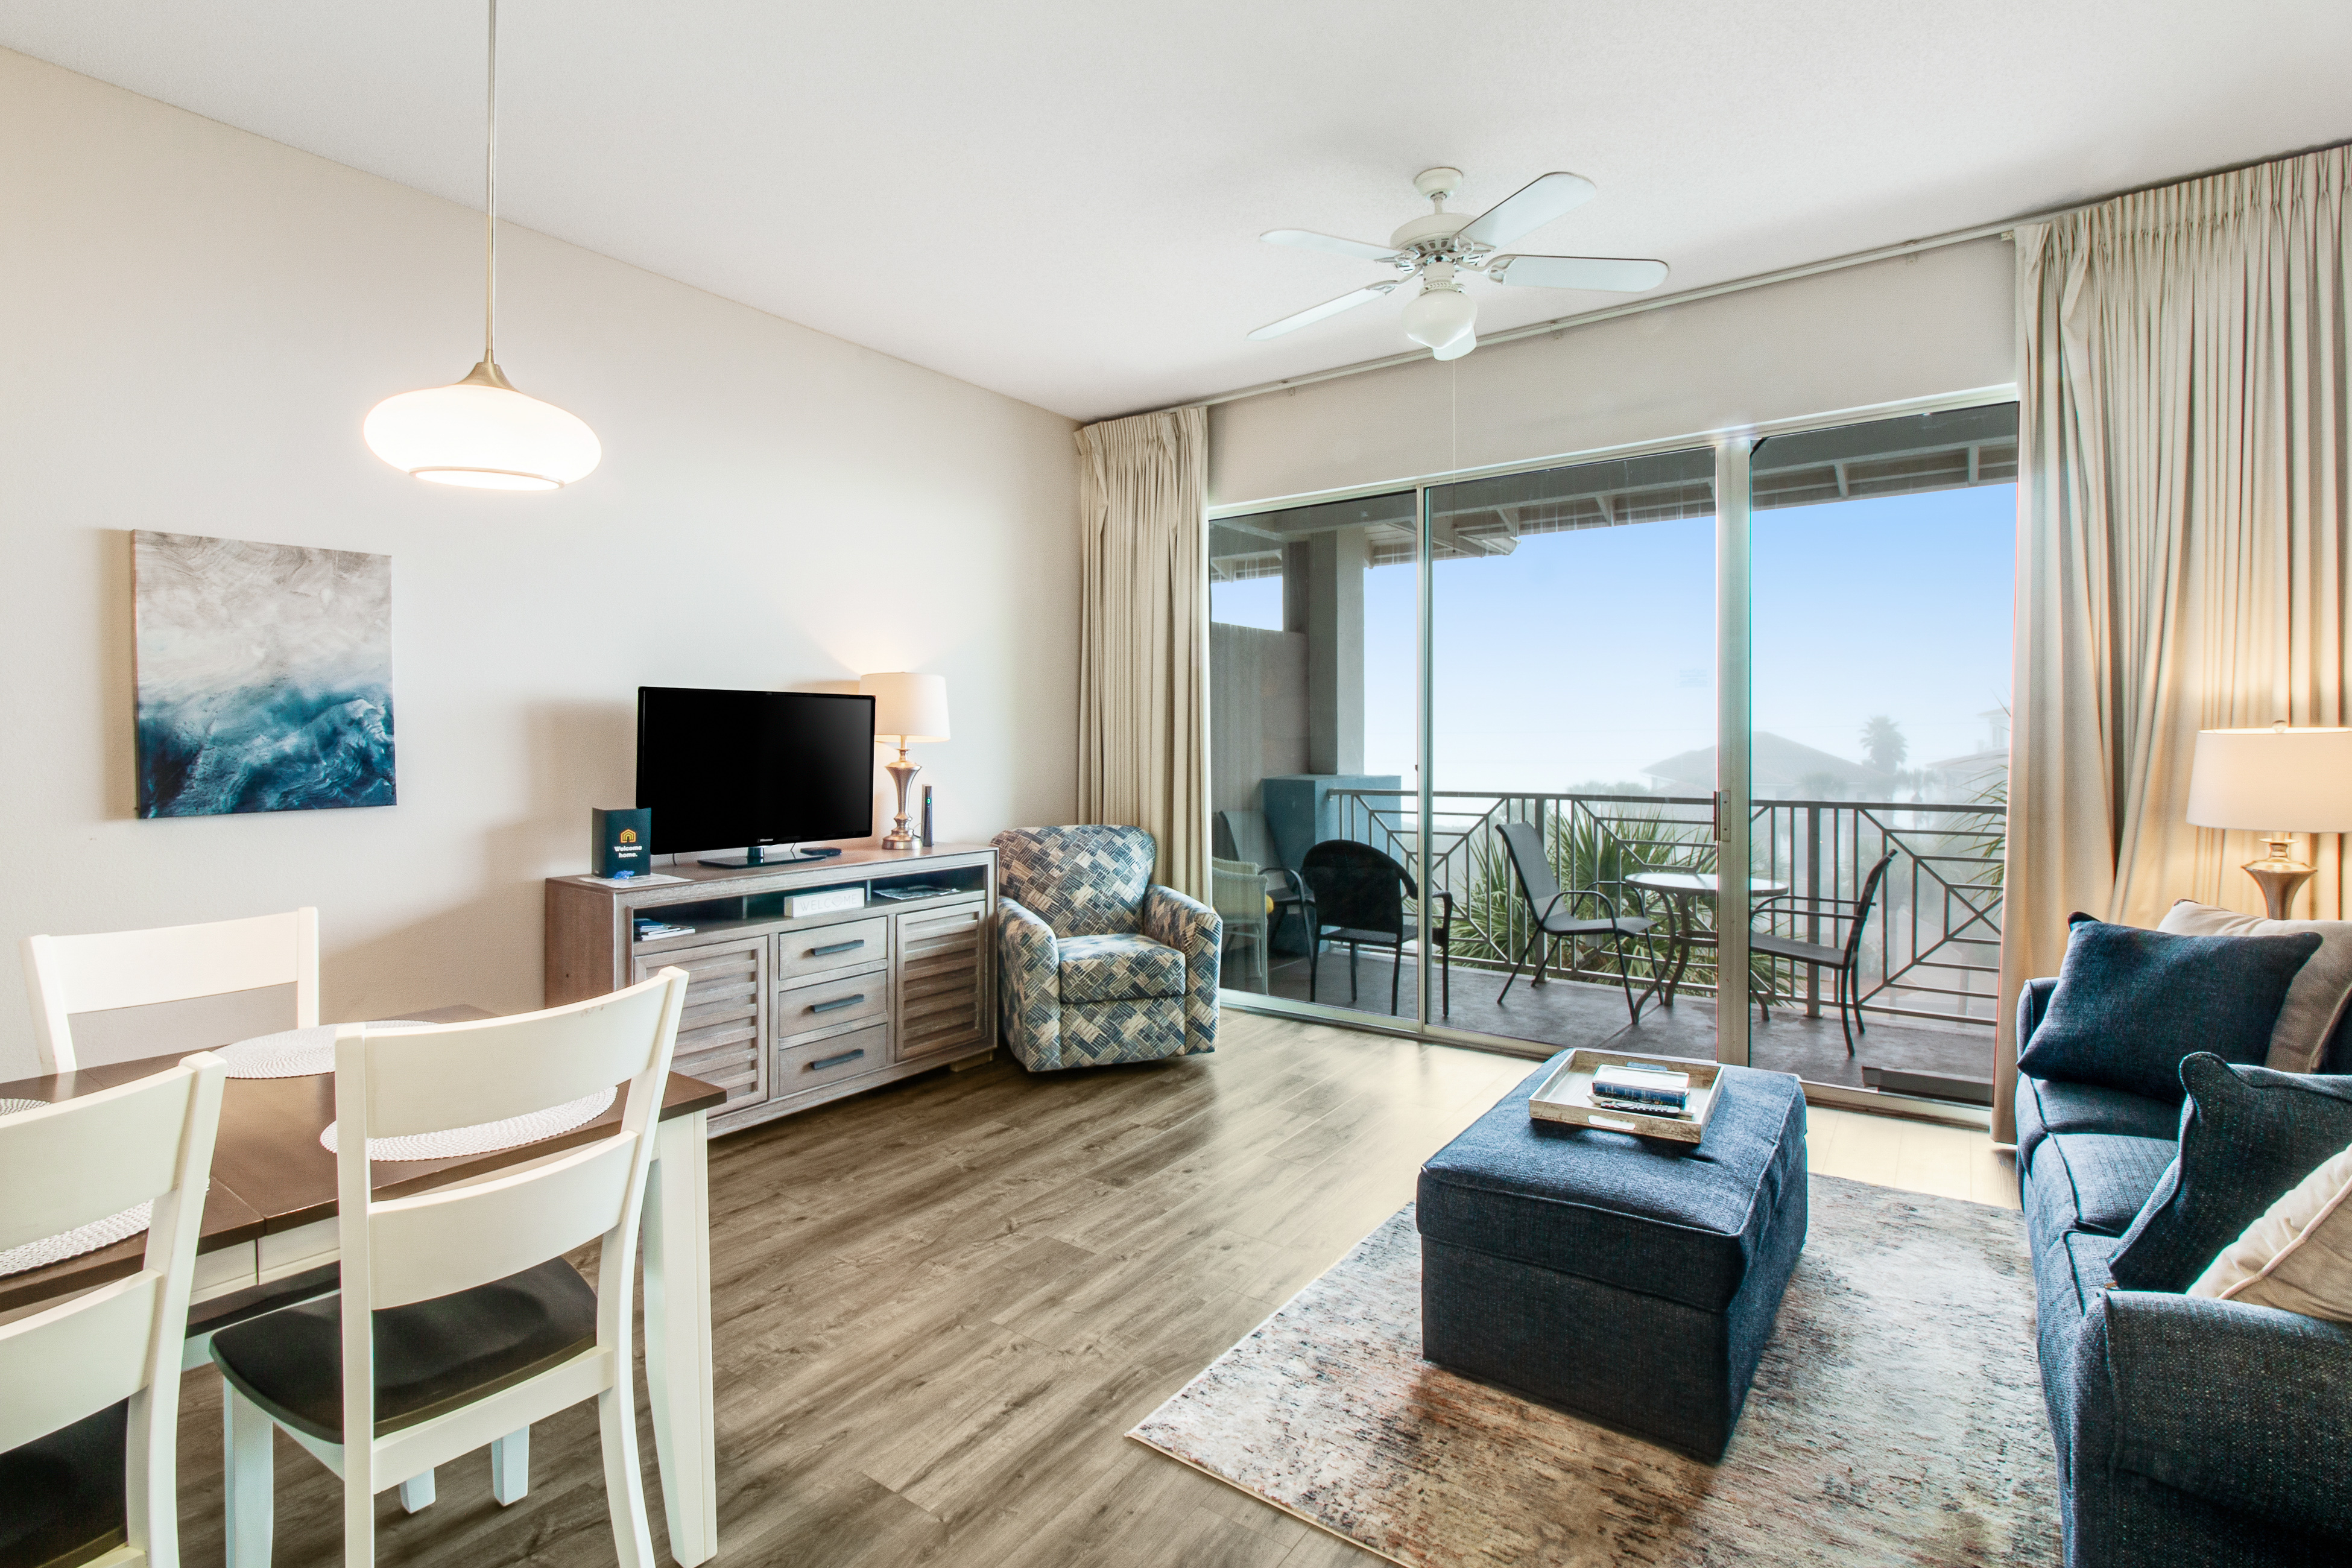 Gulf Place Cabanas 407 Condo rental in Gulf Place Cabanas ~ Santa Rosa Beach Vacation Rentals by BeachGuide 30a in Highway 30-A Florida - #1